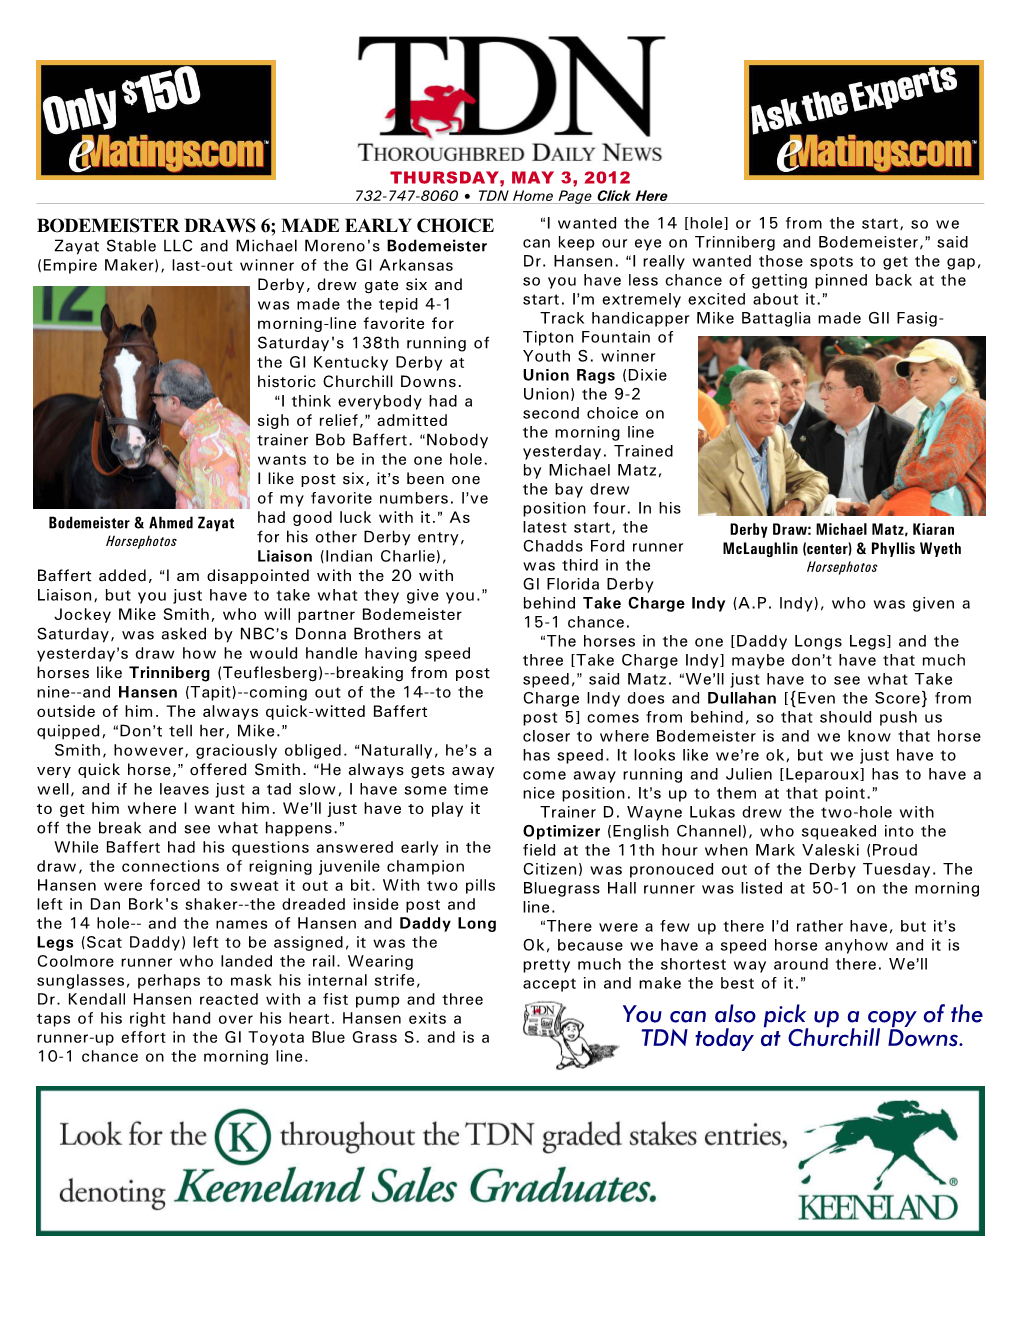 You Can Also Pick up a Copy of the TDN Today at Churchill Downs